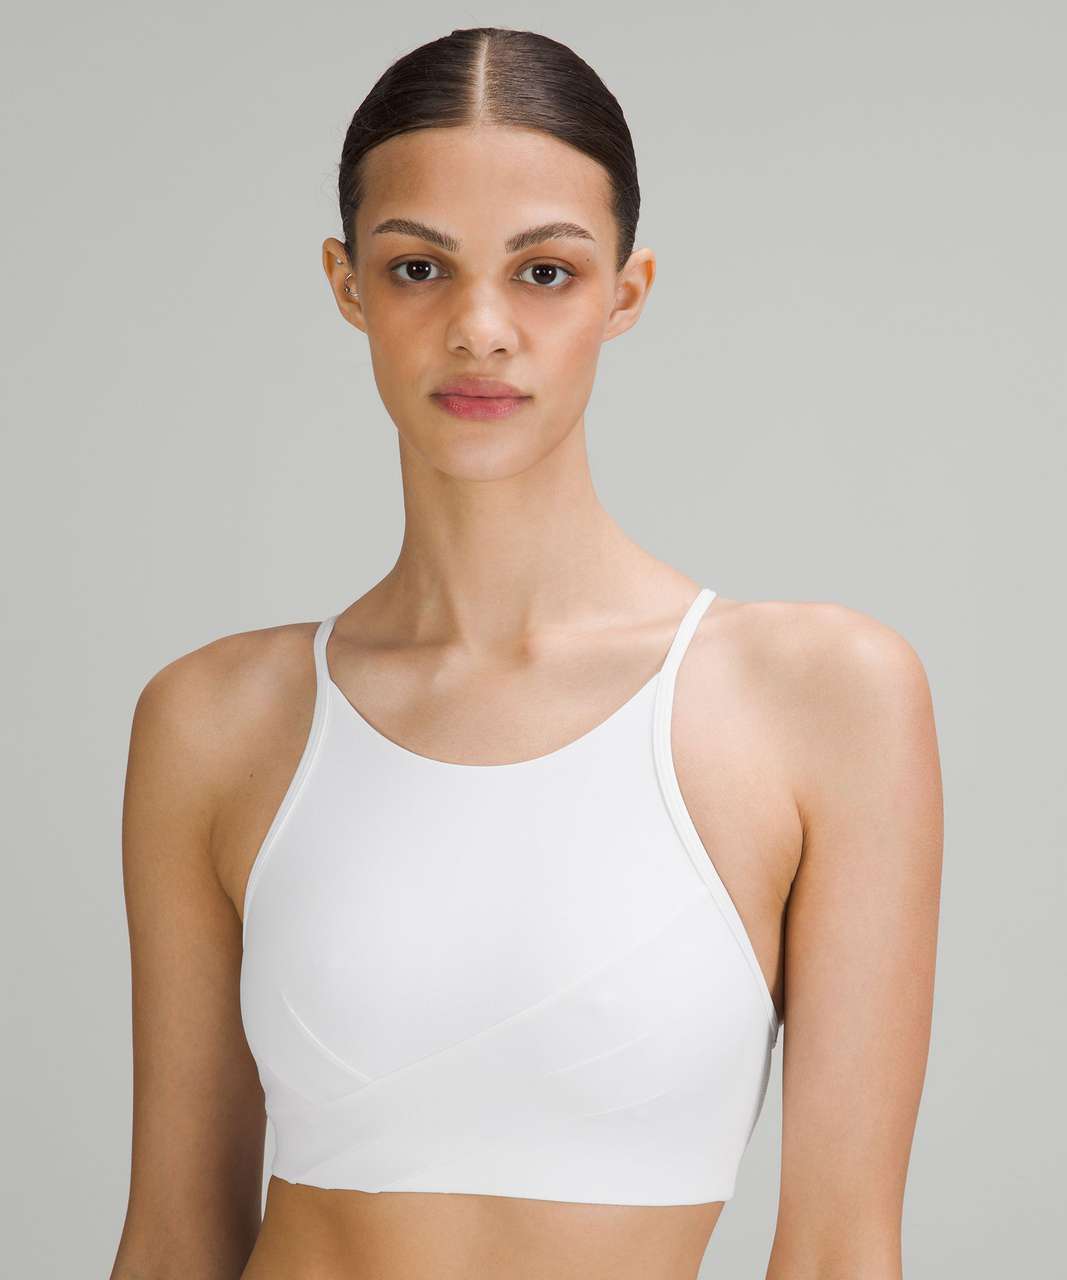 Lululemon Flow Y Wrap-Front High-Neck Bra *Light Support, B/C Cup - White